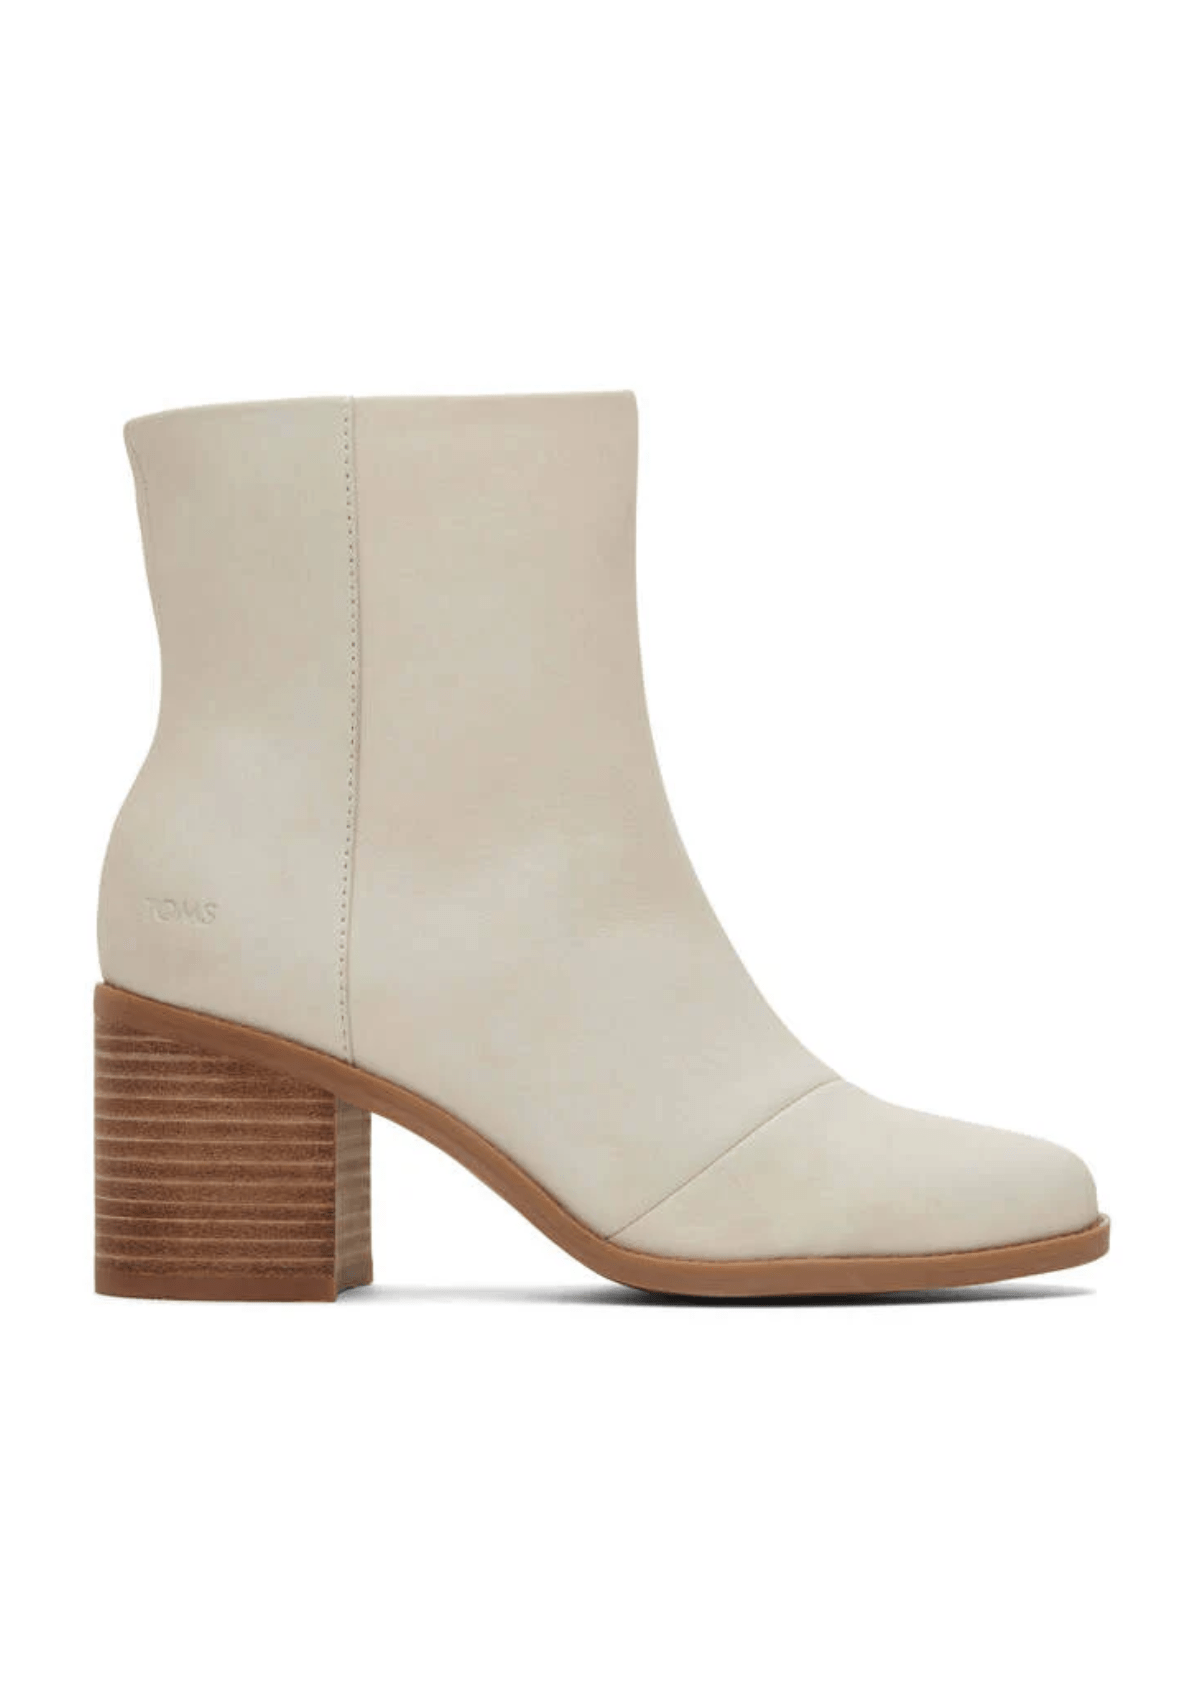 Evelyn Bootie with Stacked Heel, Light Sand Leather -Toms- Ruby Jane-